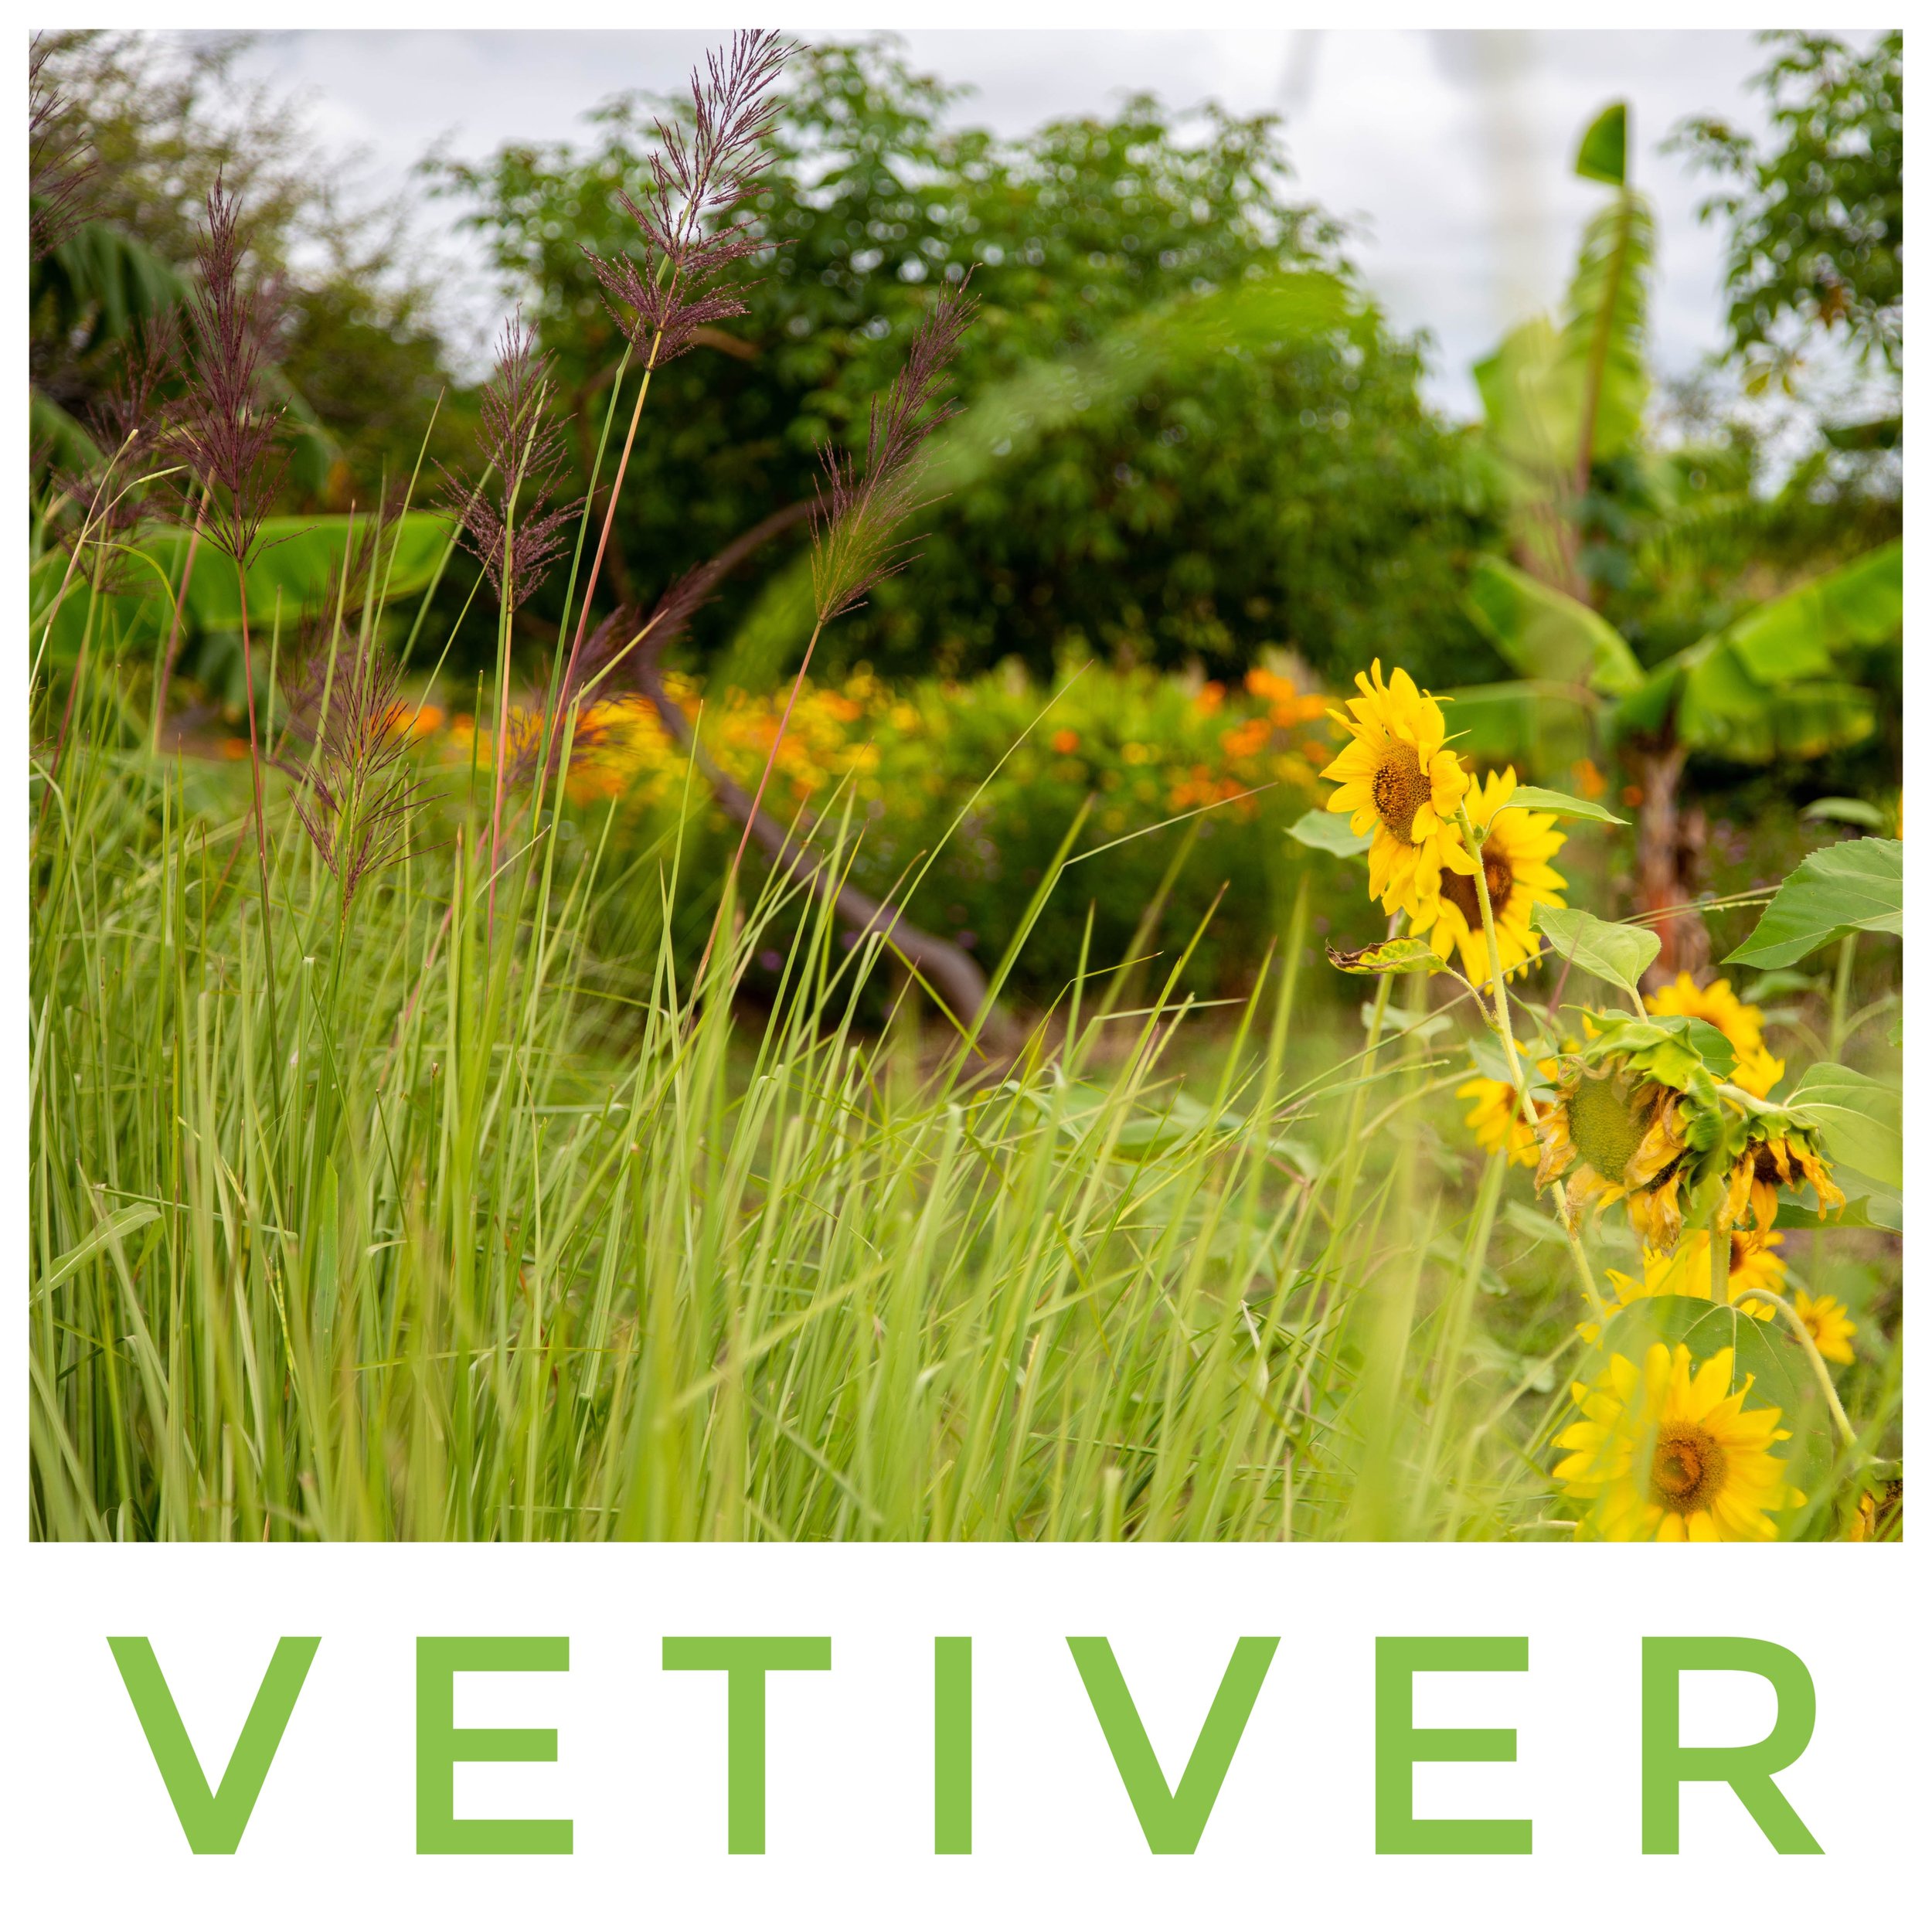 Vetiver - a Miracle Grass